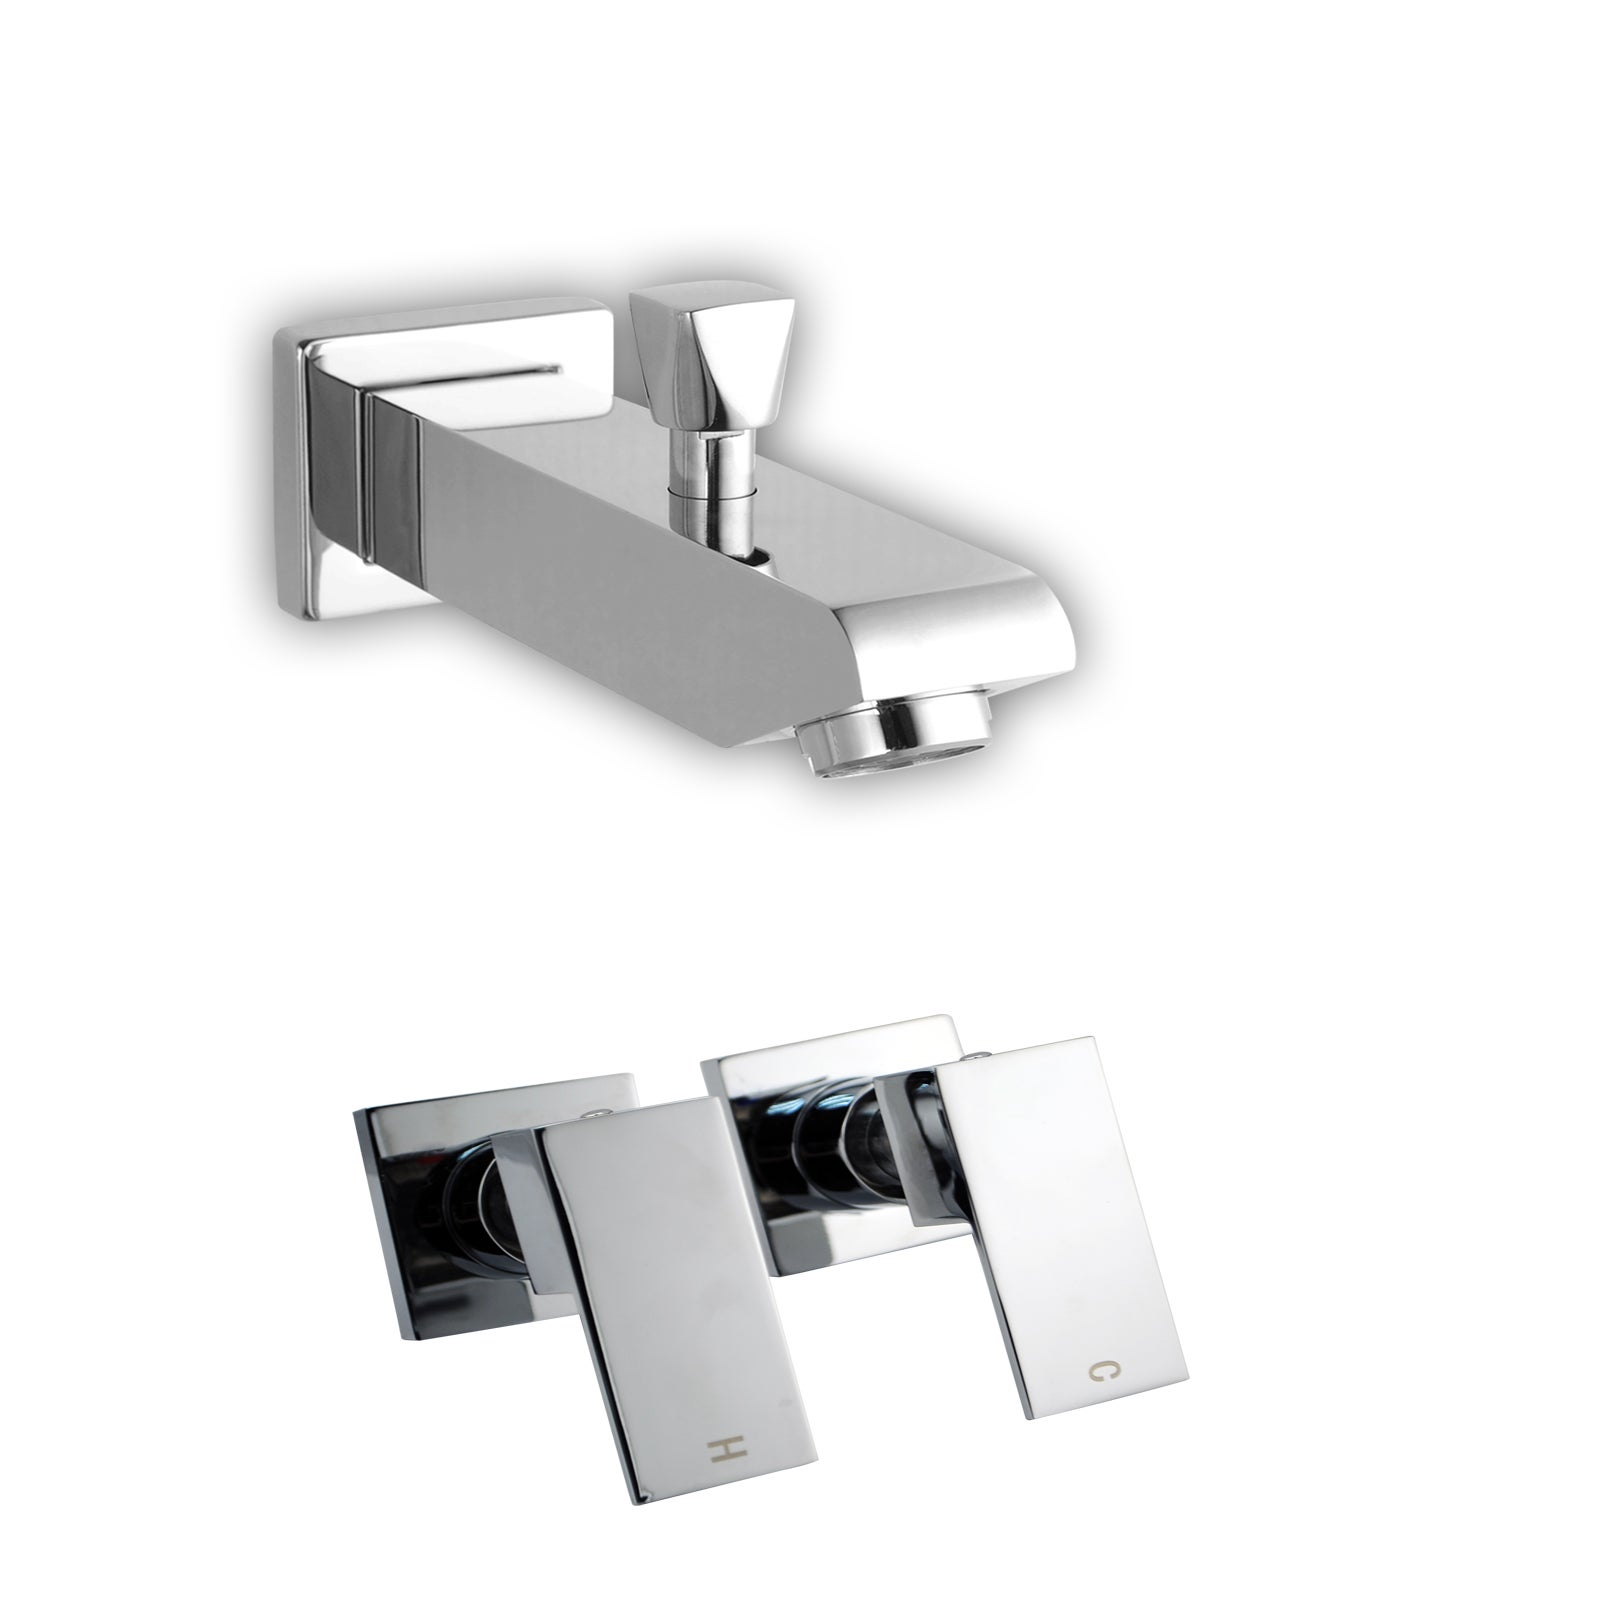 ACA Bath Square Spout With Shower Diverter 1/4 Turn Wall Taps Chrome